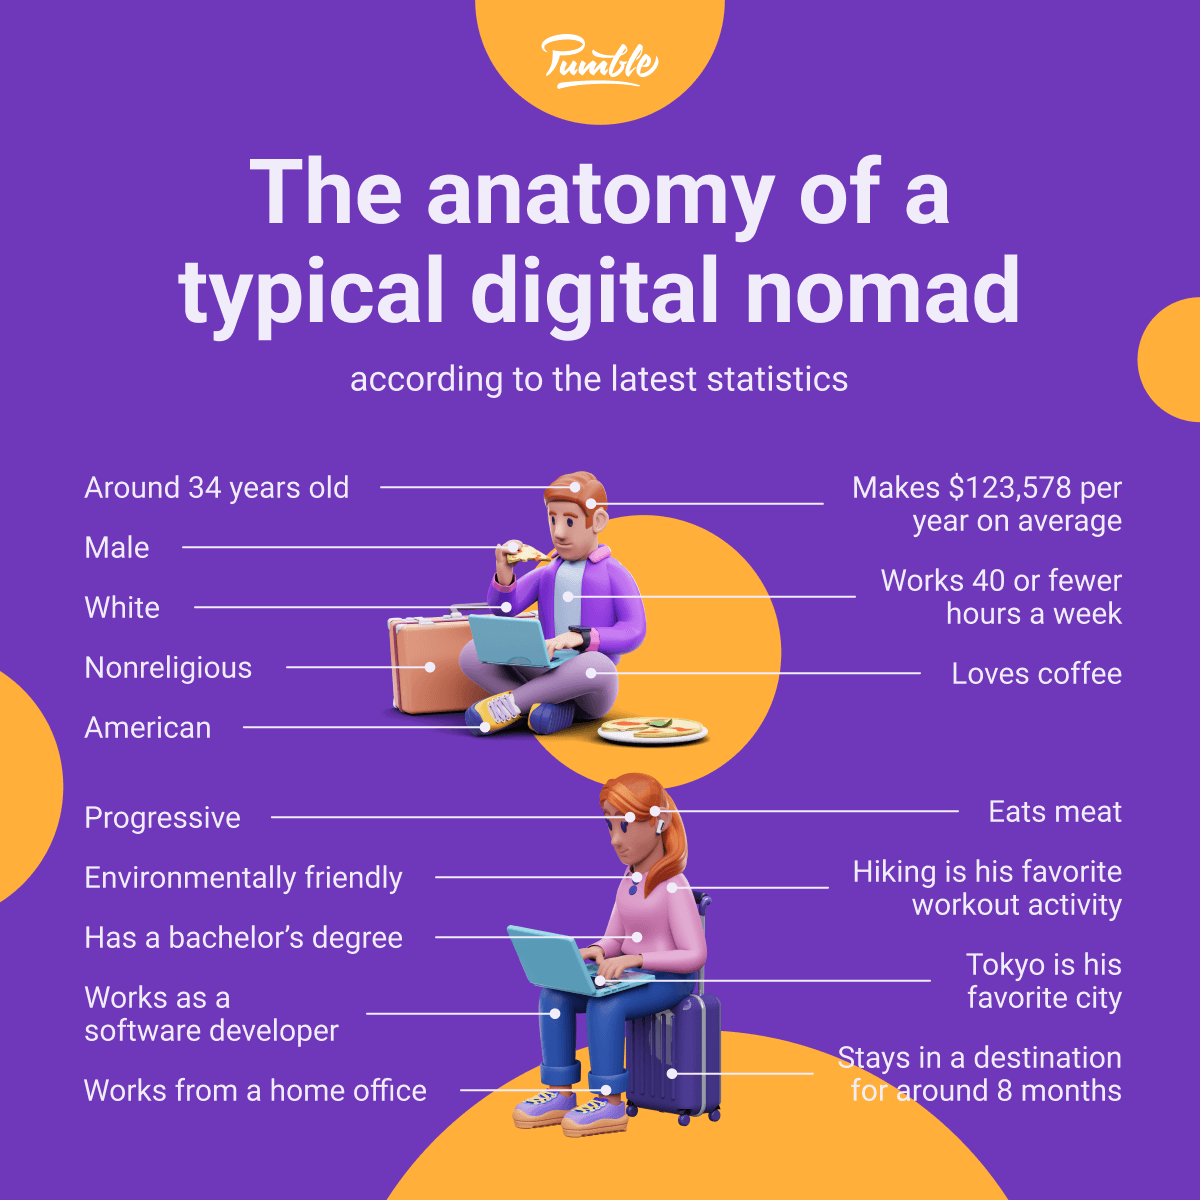 The anatomy of a typical digital nomad